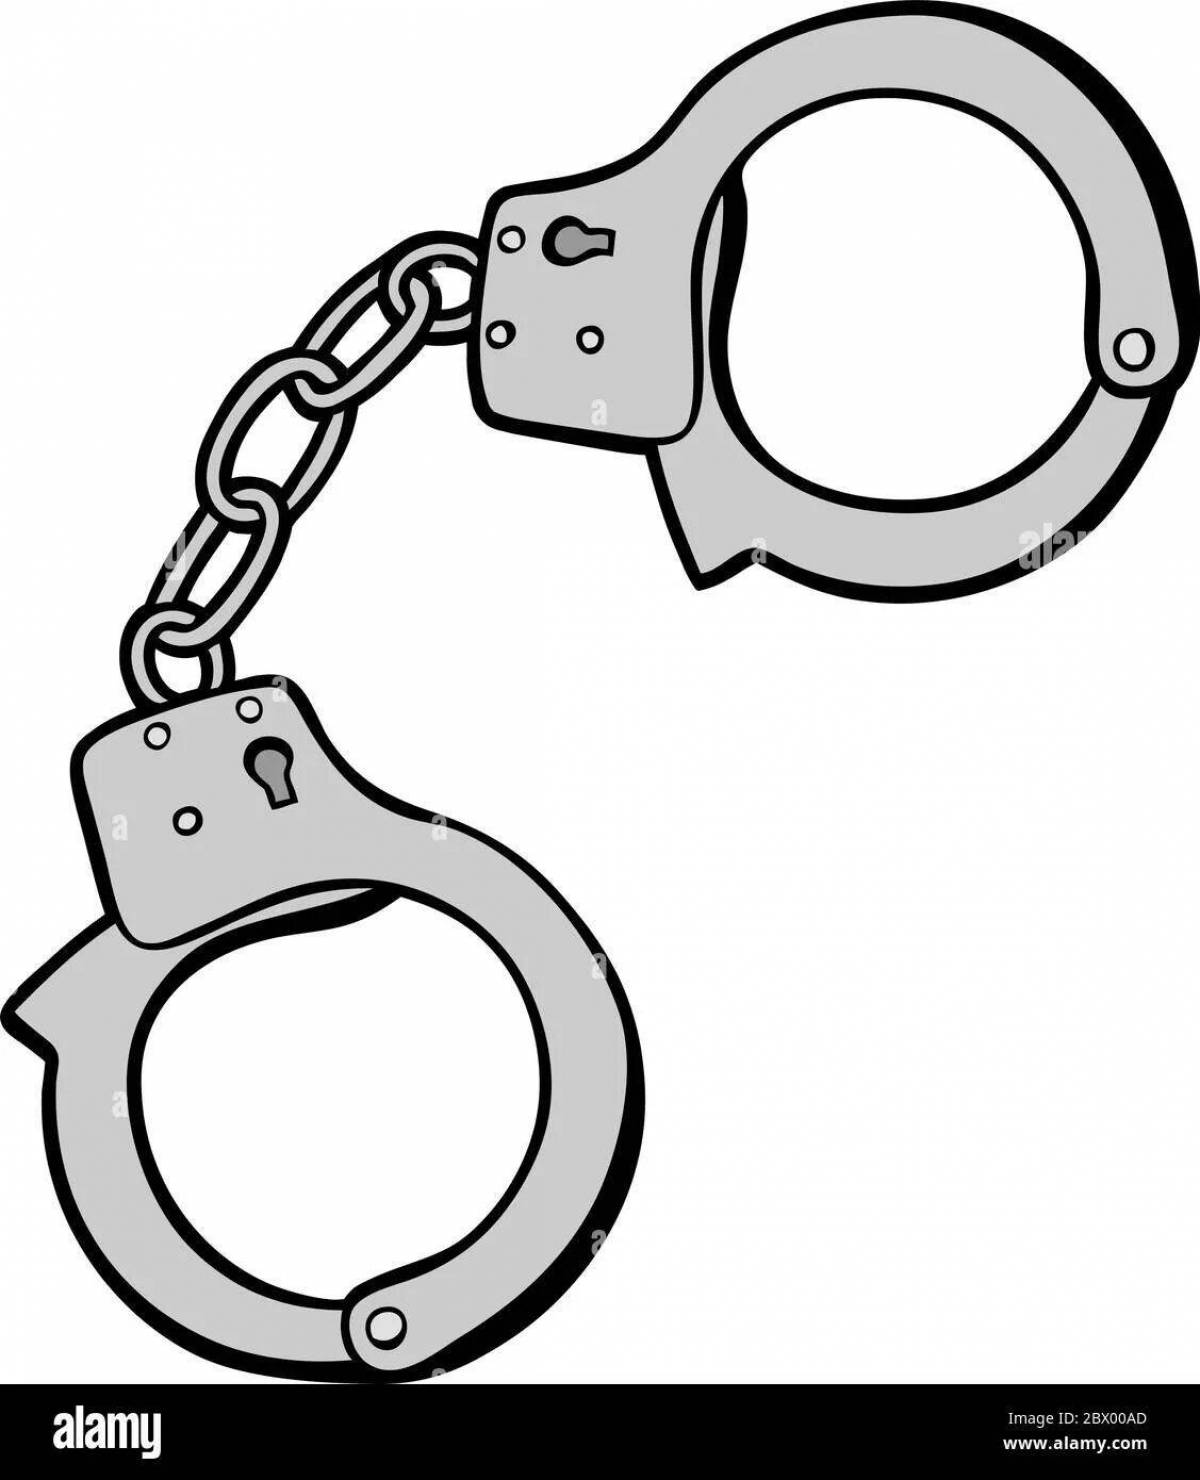 Gorgeous handcuffs coloring page